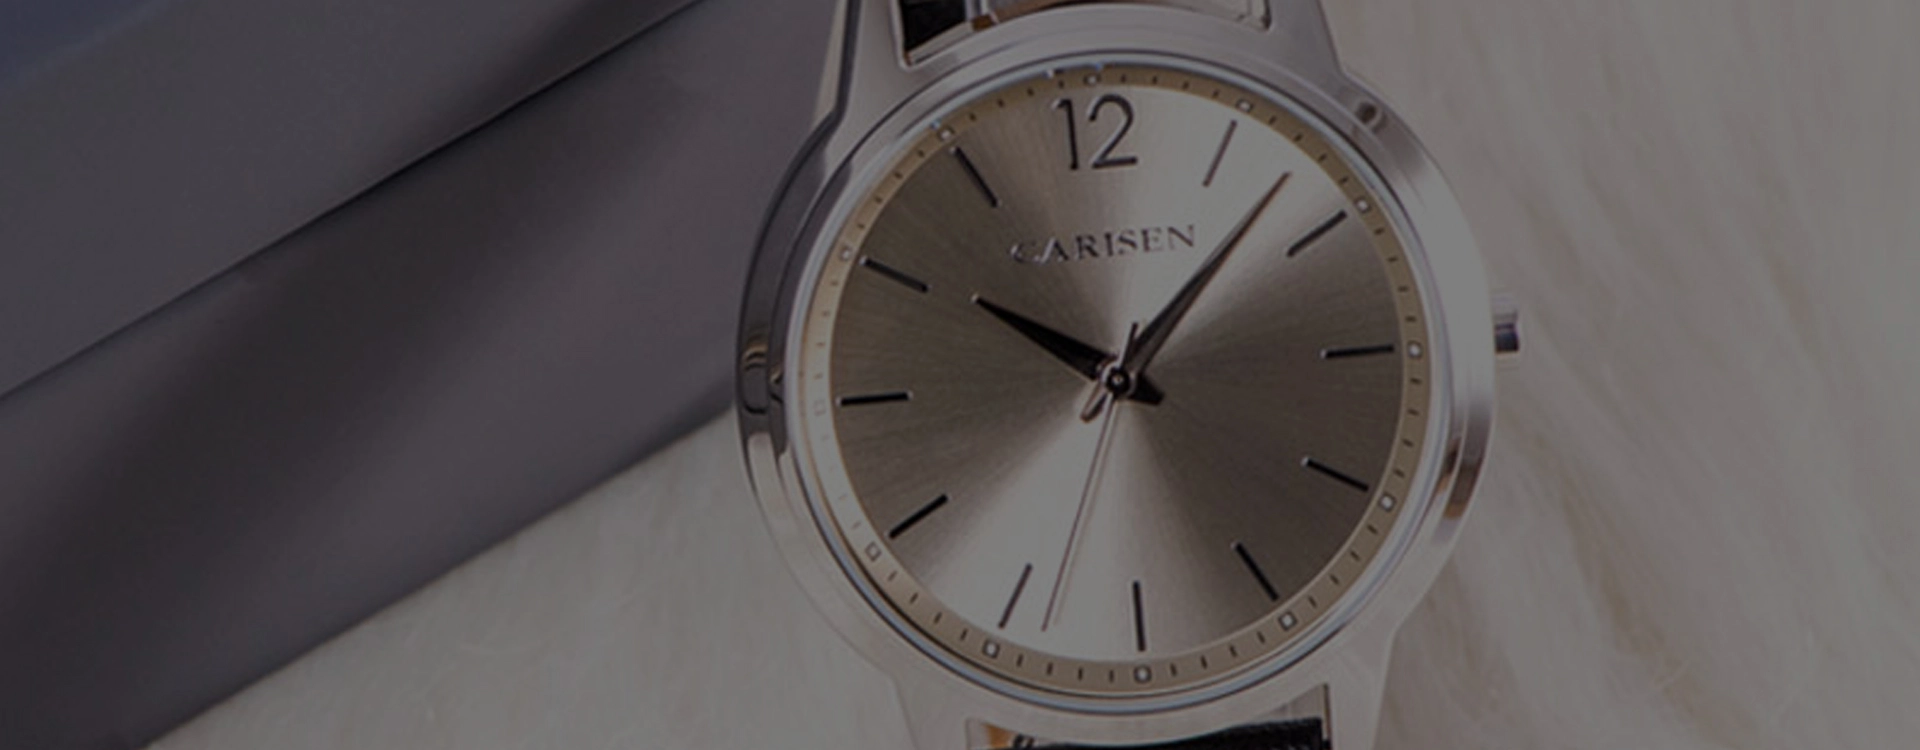 Customization And Personalization Options For Casual Watches